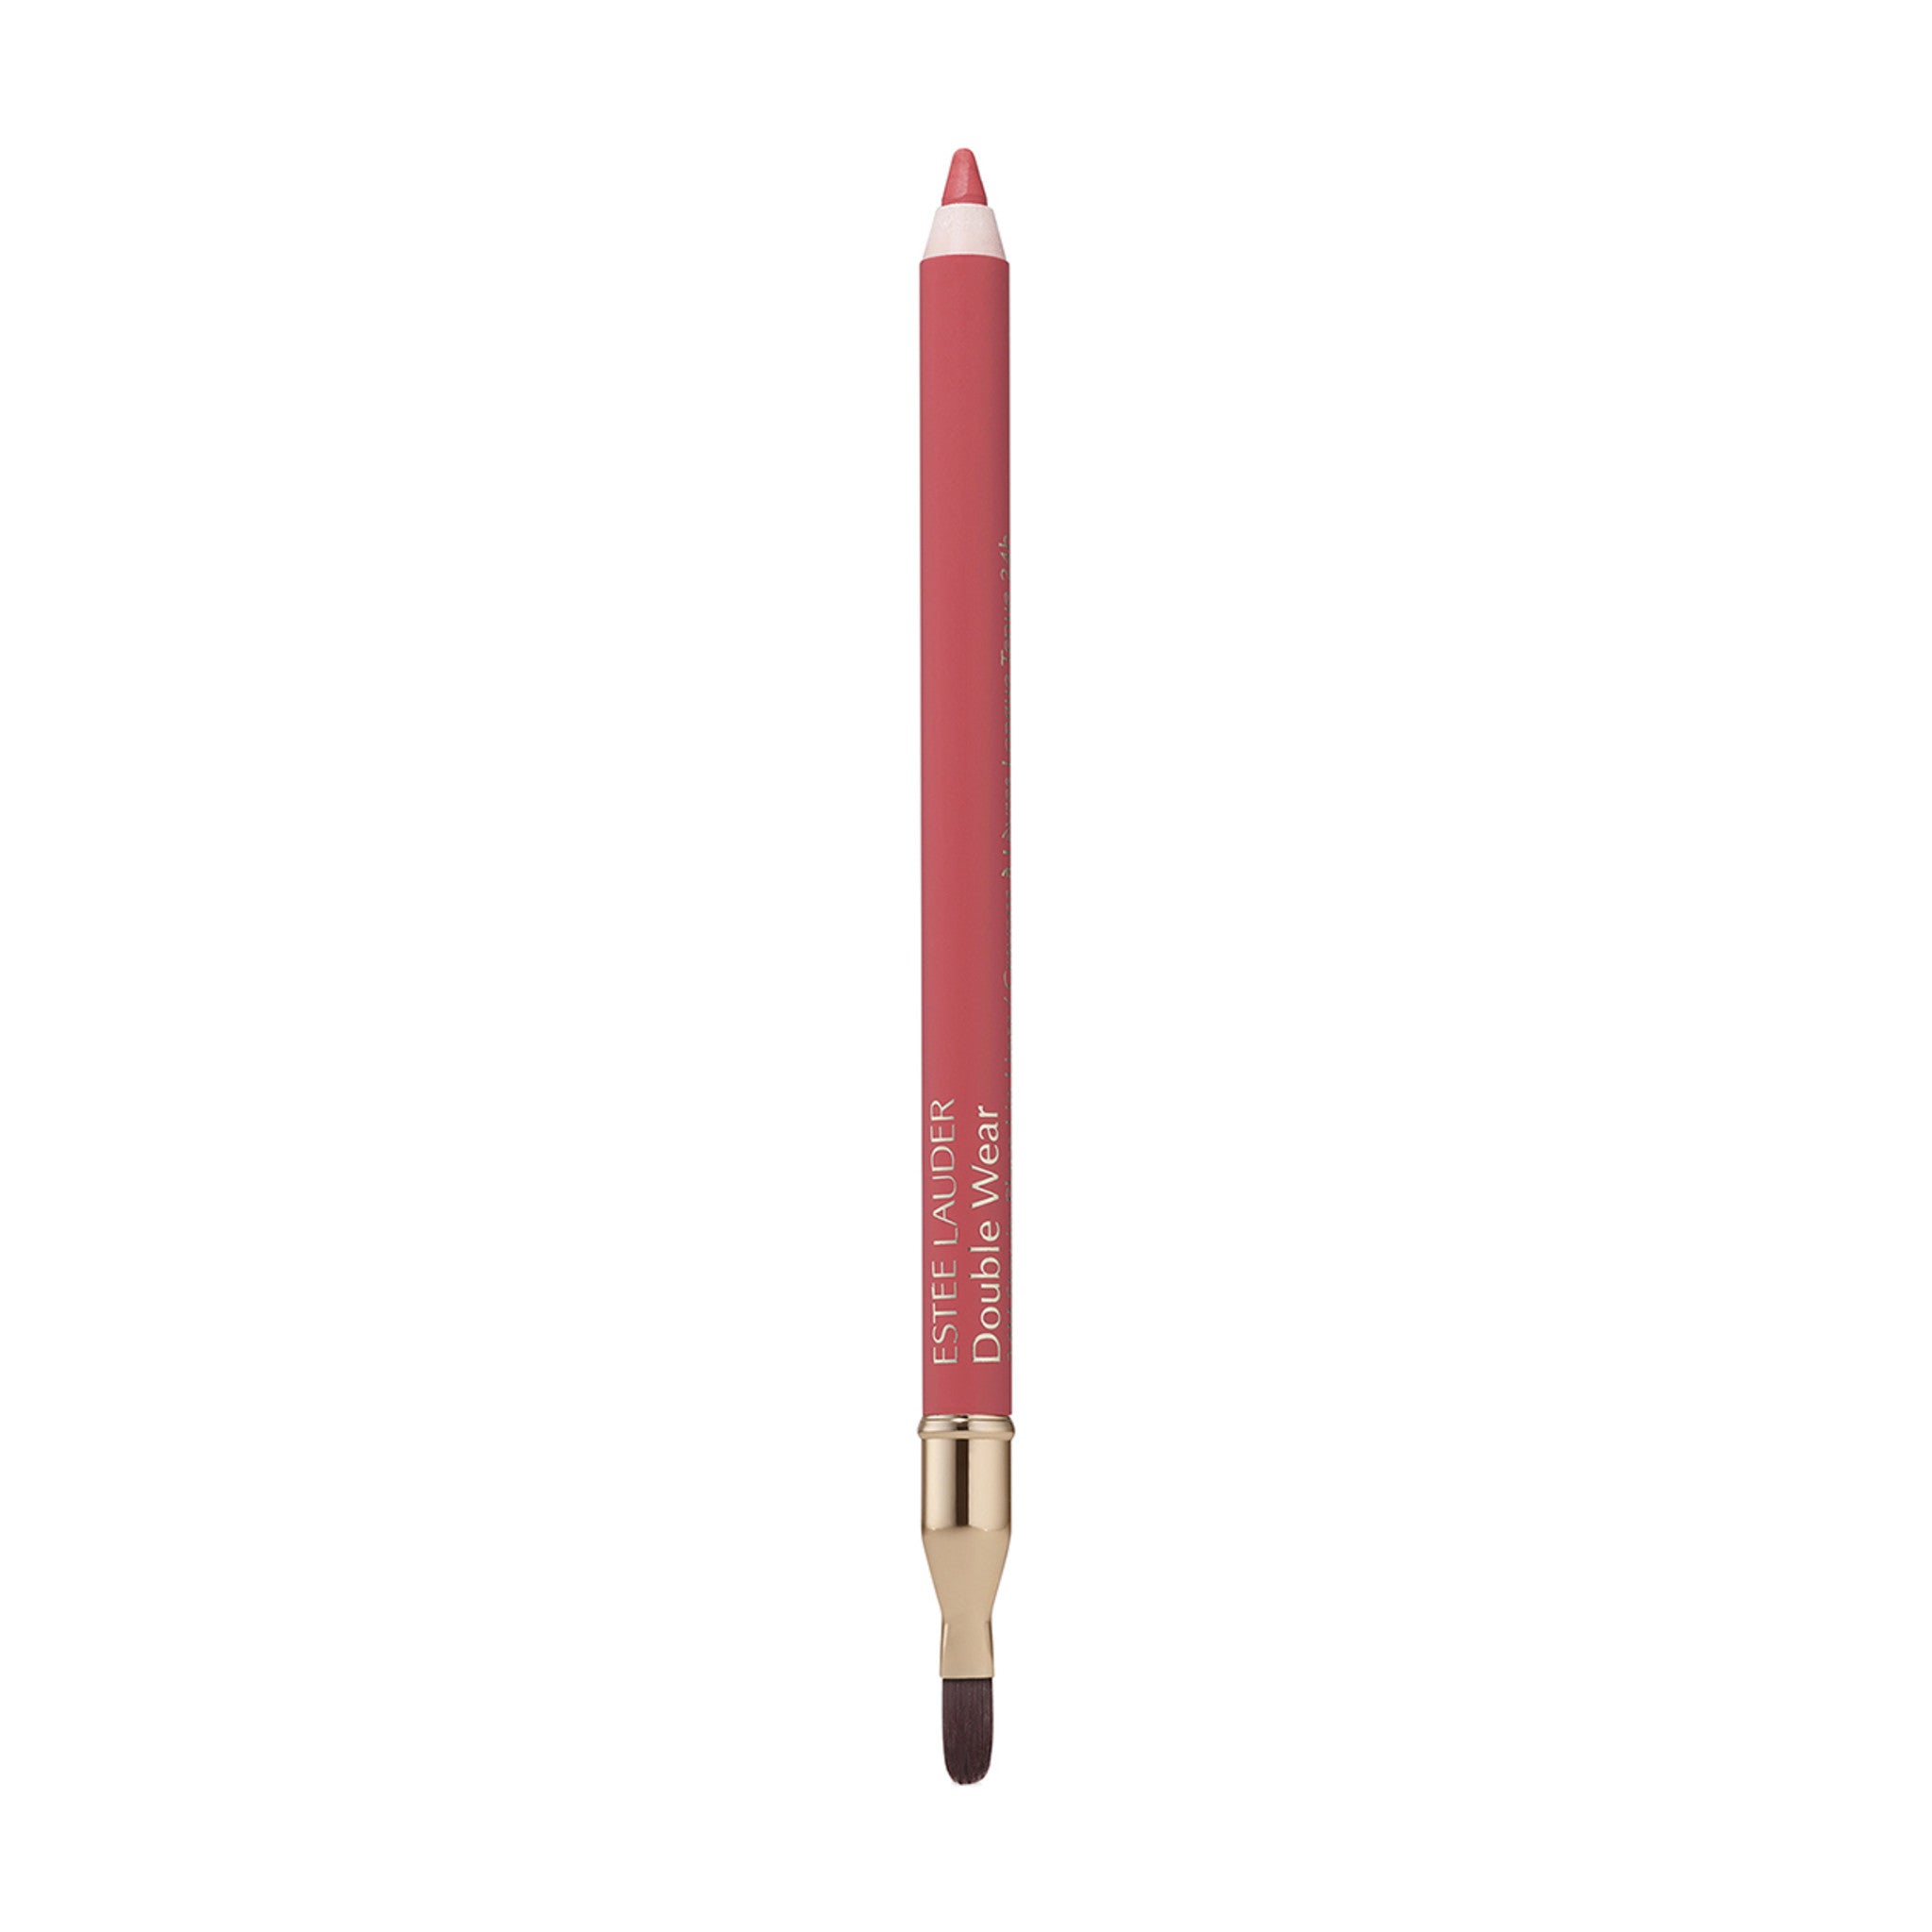 Estée Lauder Double Wear 24H Stay-in-Place Lip Liner Color/Shade variant: Blush. This product is in the color brown